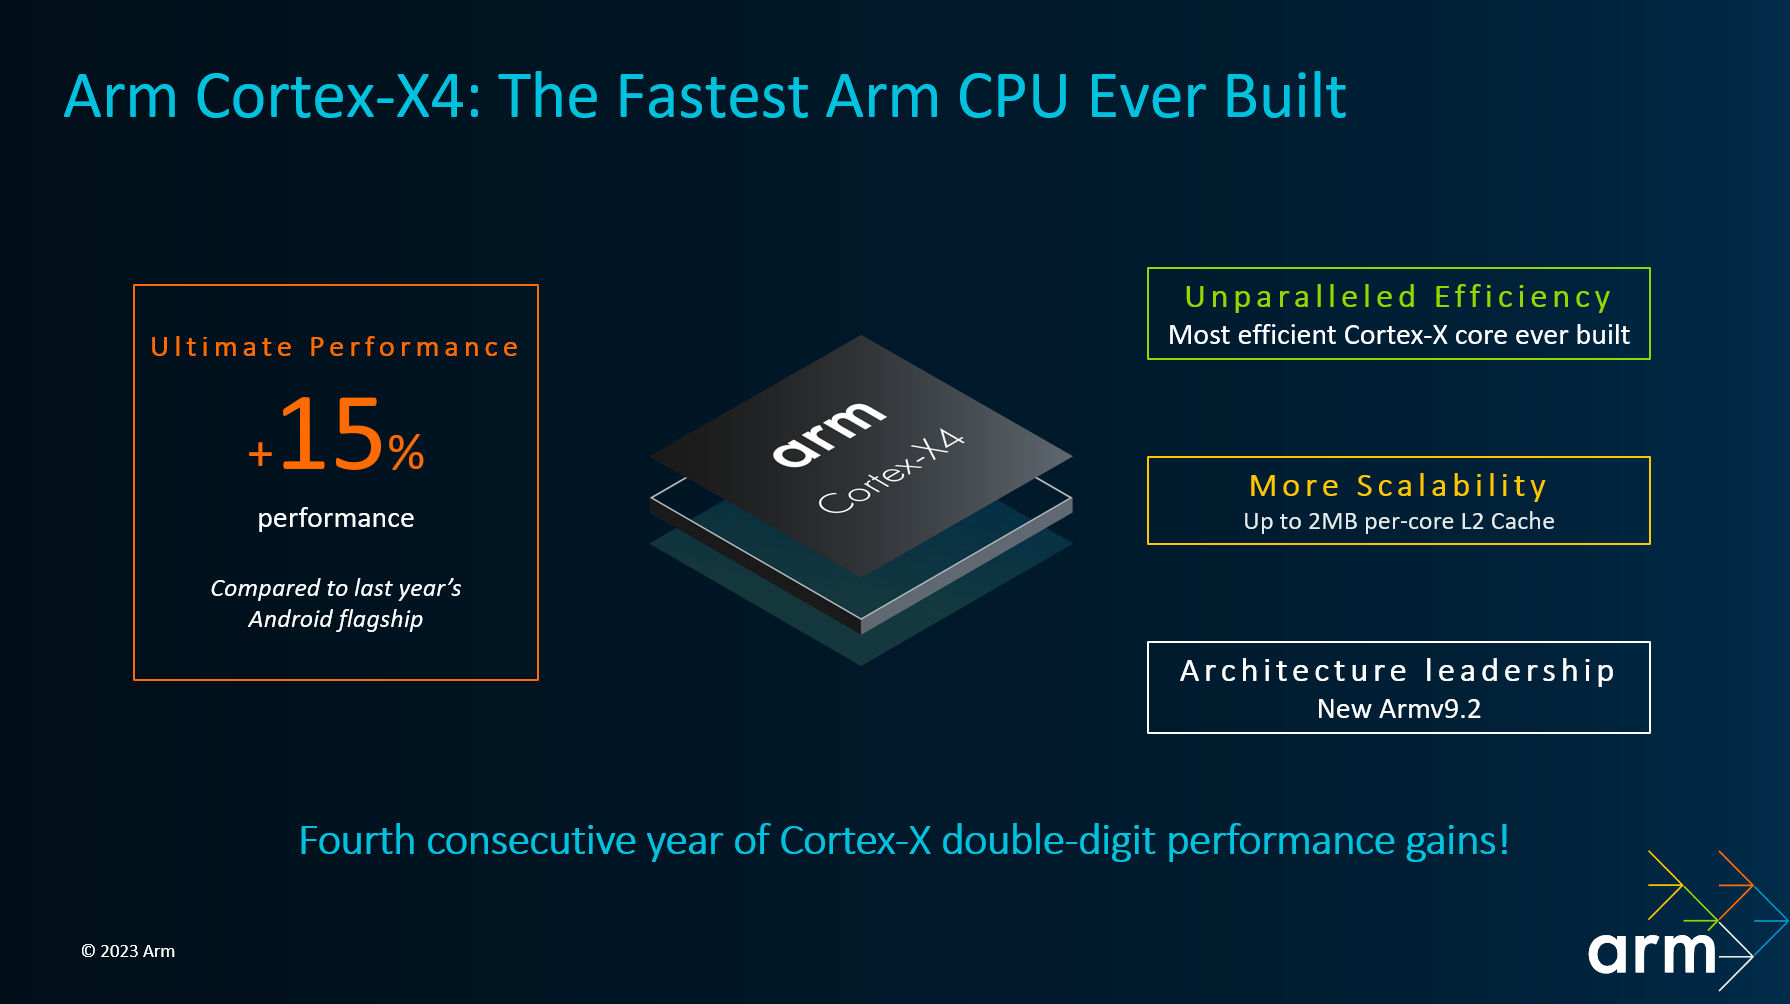 The last four years have seen Arm on a relentless pursuit of the very best CPU performance and efficiency. It started with the Arm Cortex-X1, which wa